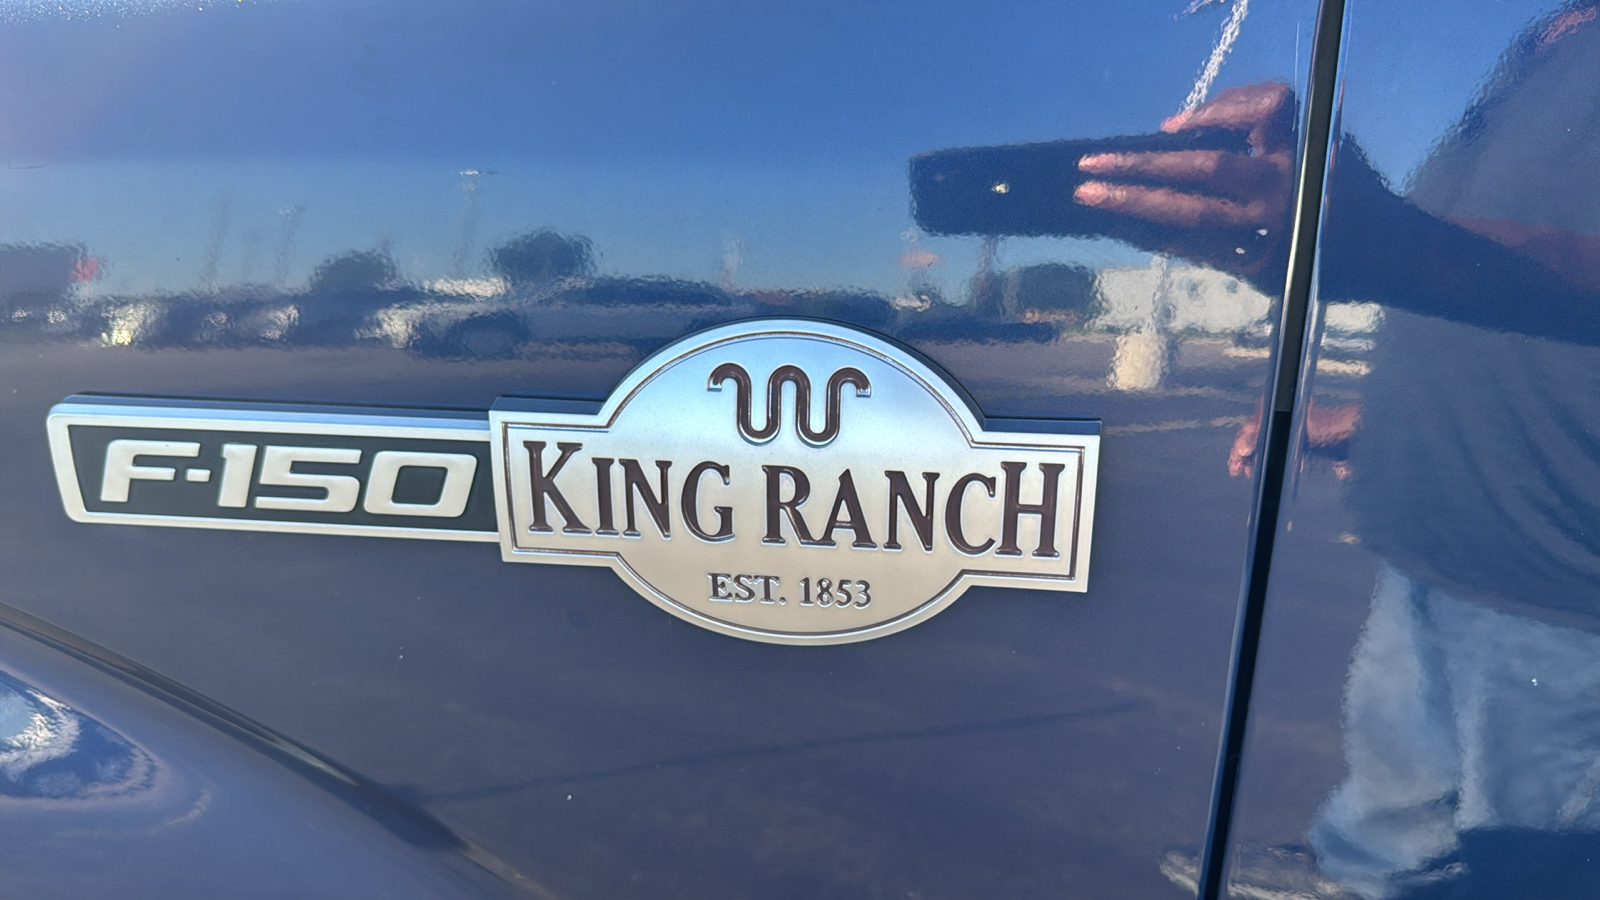 2010 Ford F-150 King Ranch 39